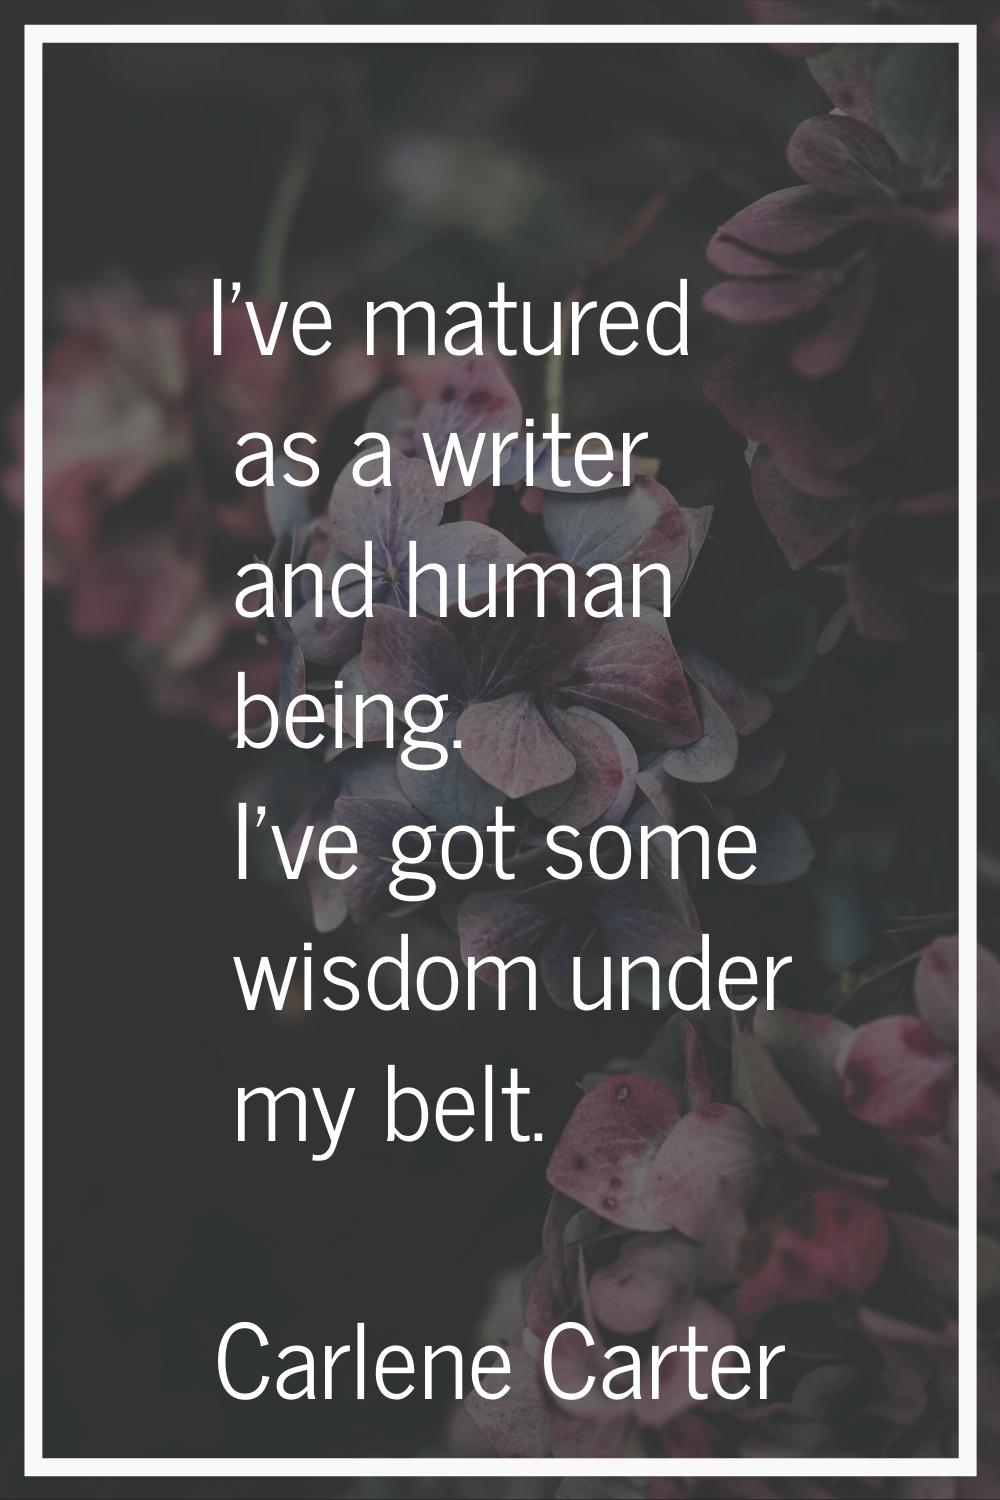 I've matured as a writer and human being. I've got some wisdom under my belt.